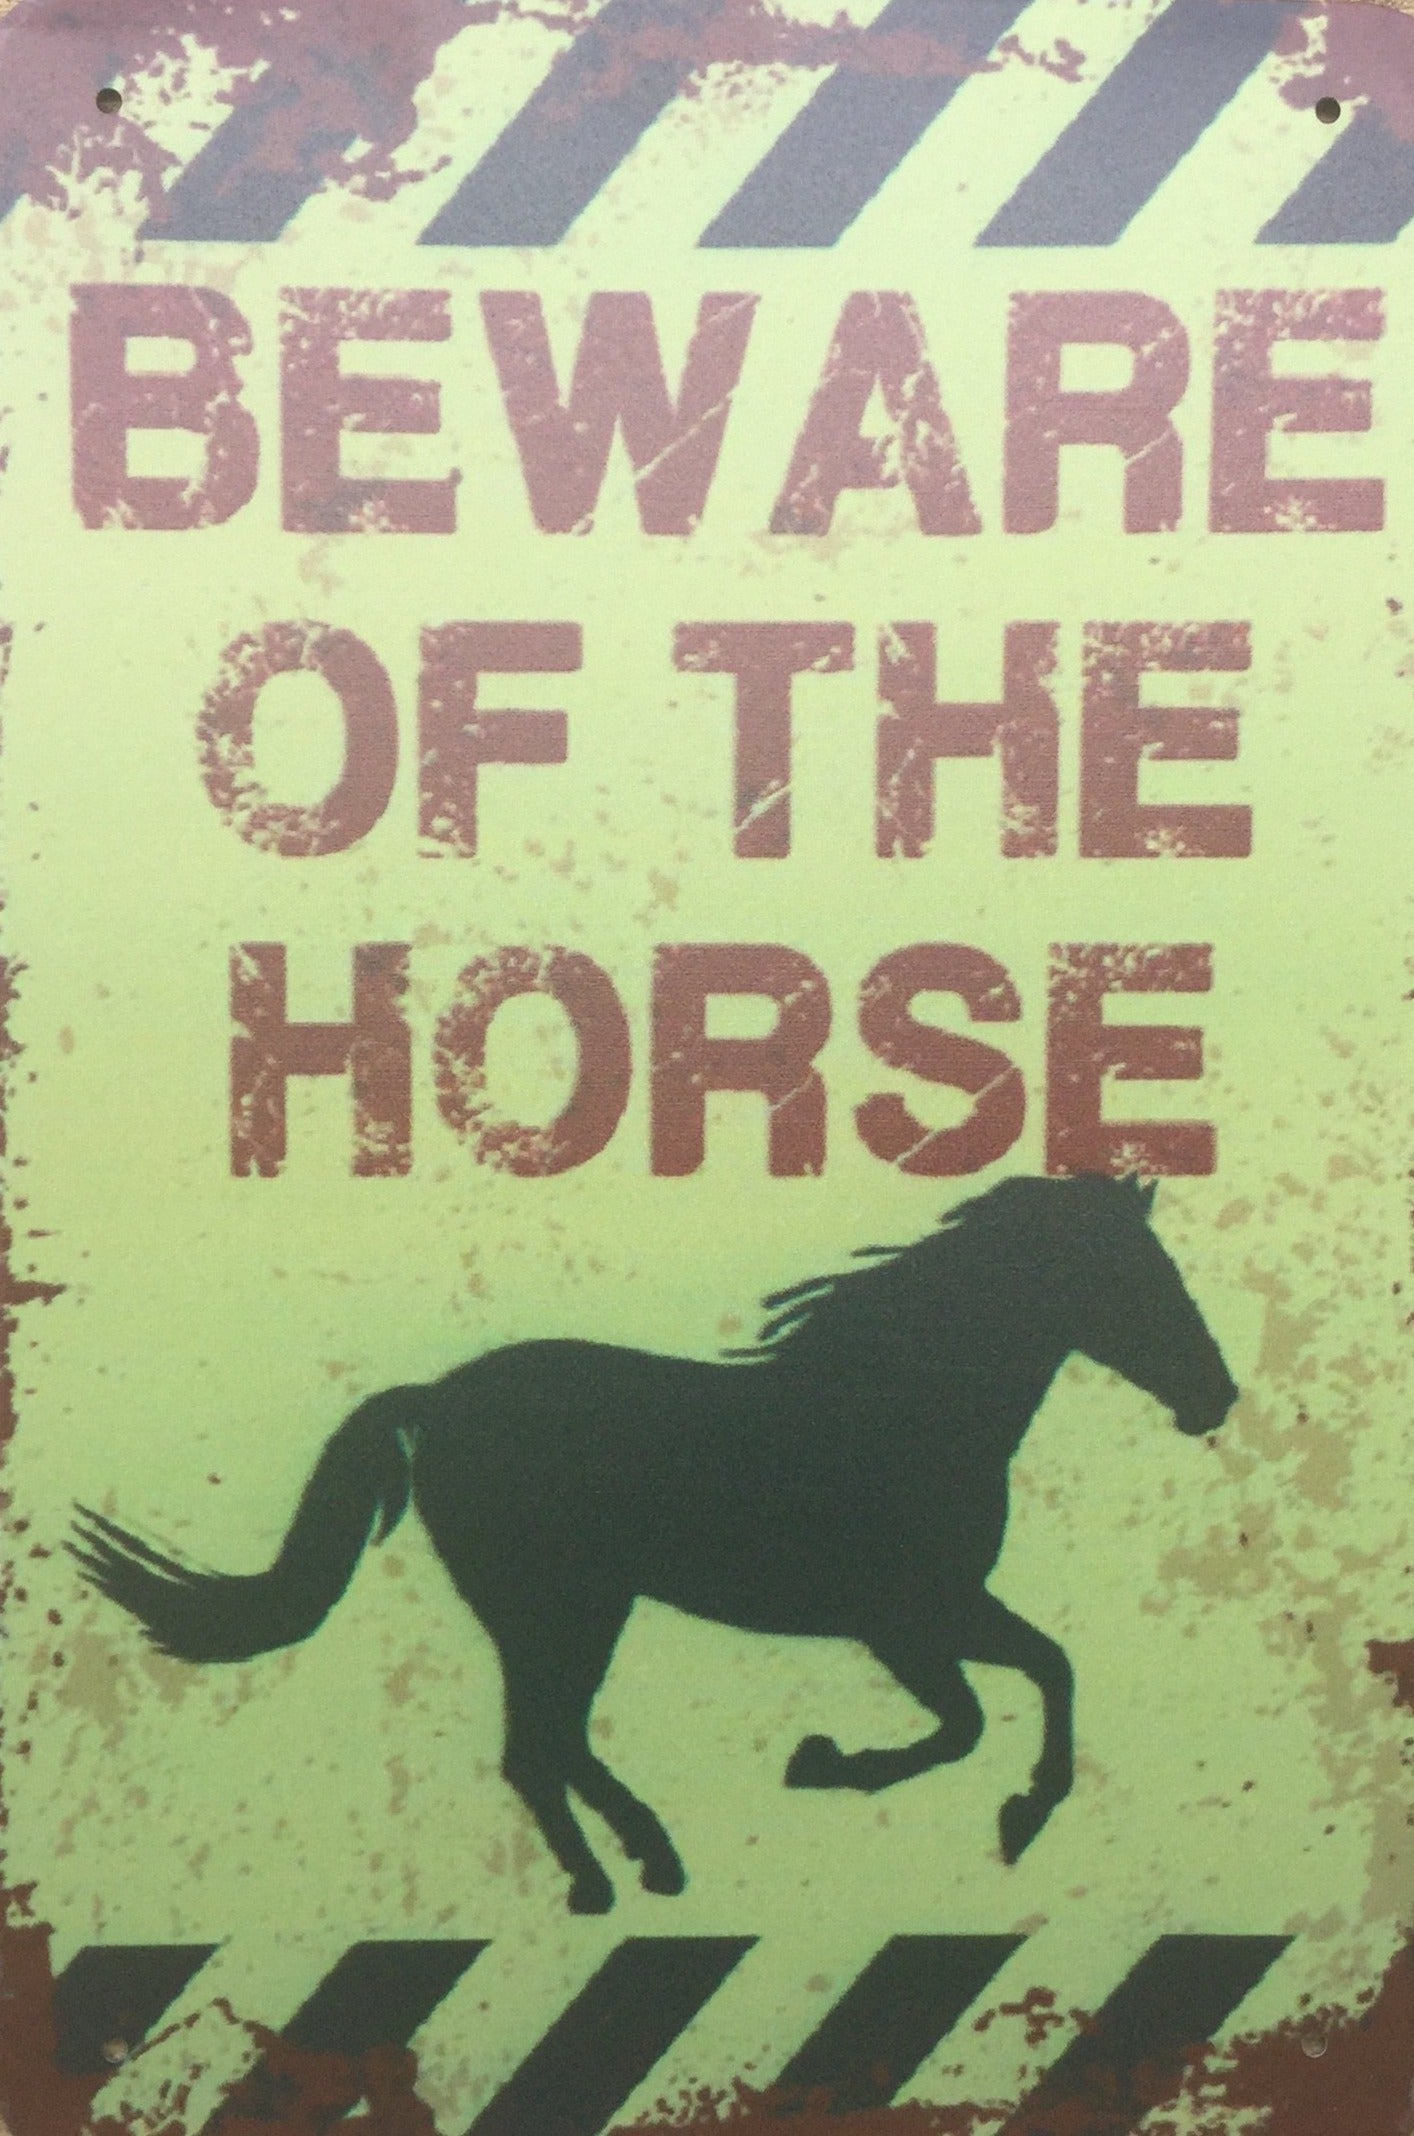 Beware of the horse